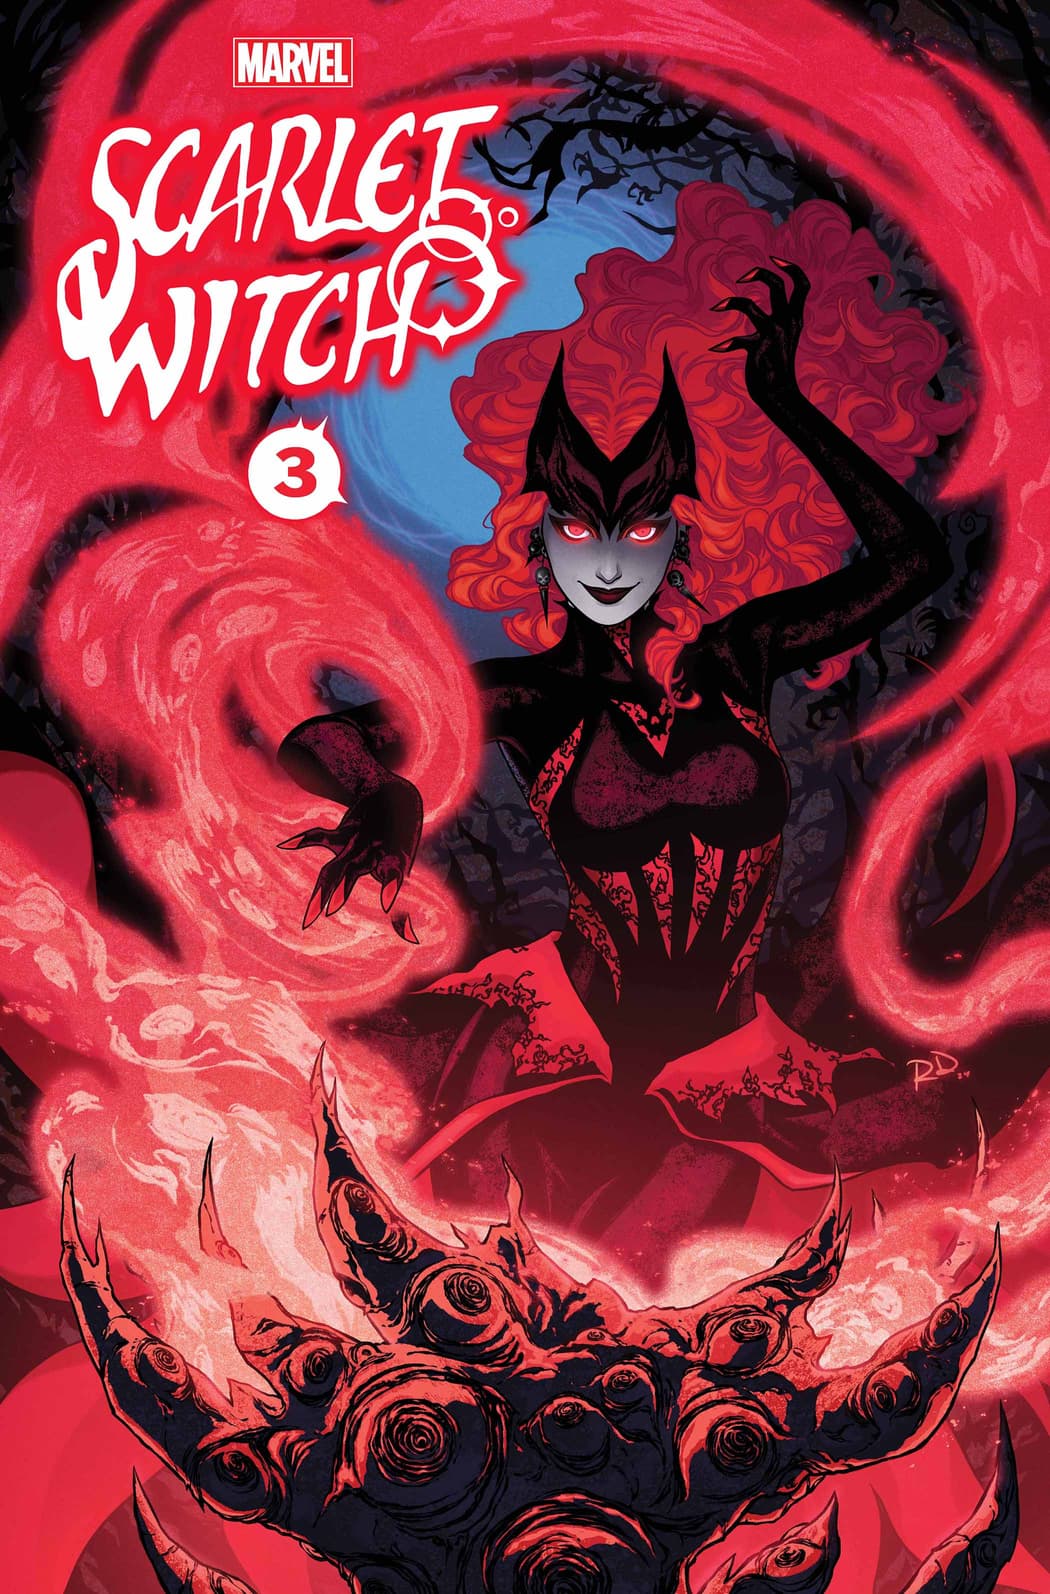 SCARLET WITCH #3 cover by Russell Dauterman